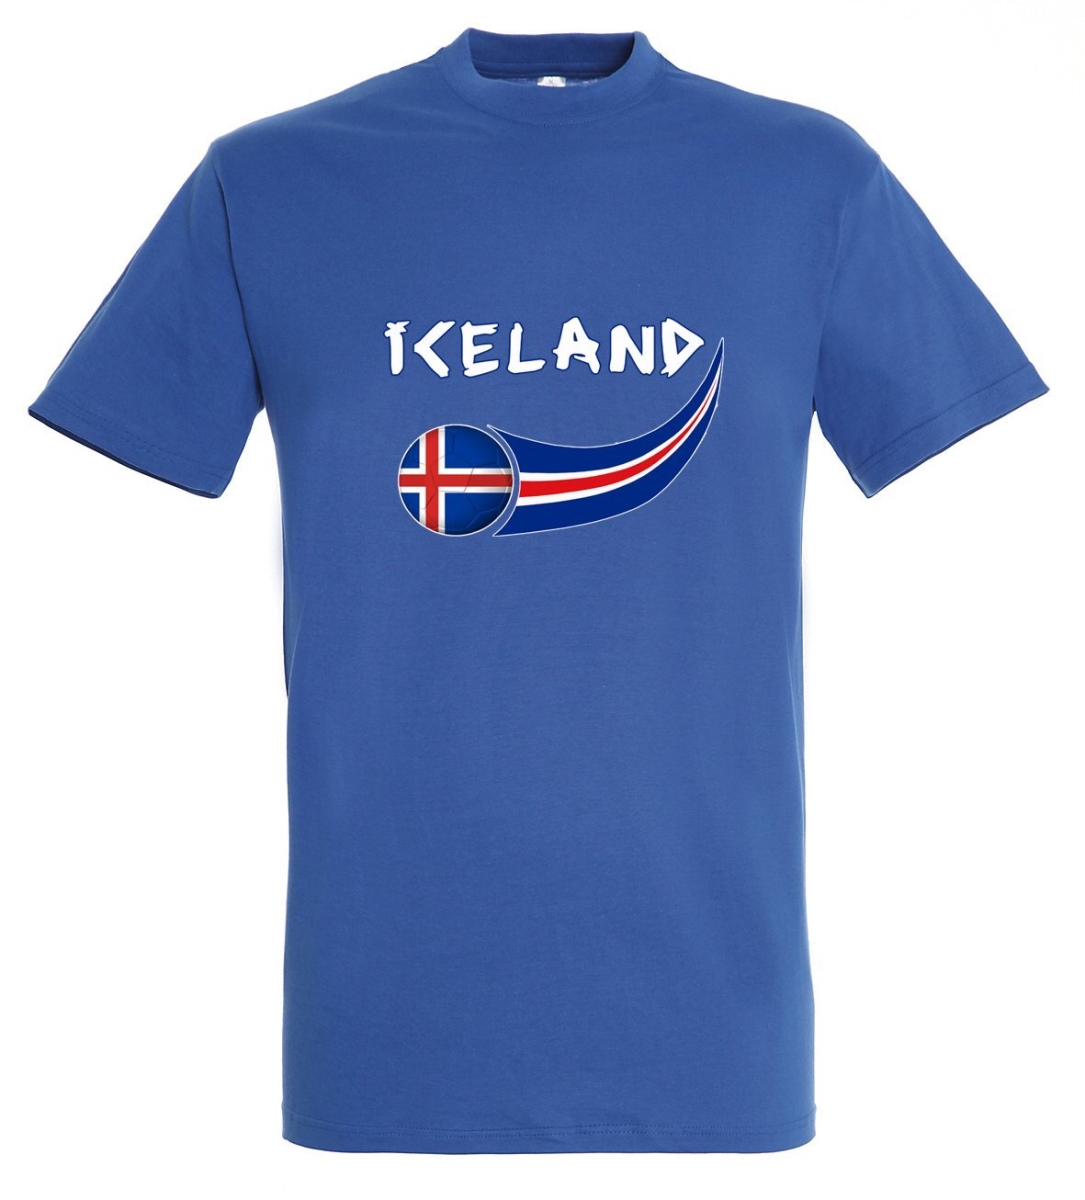 Picture of Supportershop ICBL-M Iceland T-Shirt for Men - Blue, Medium